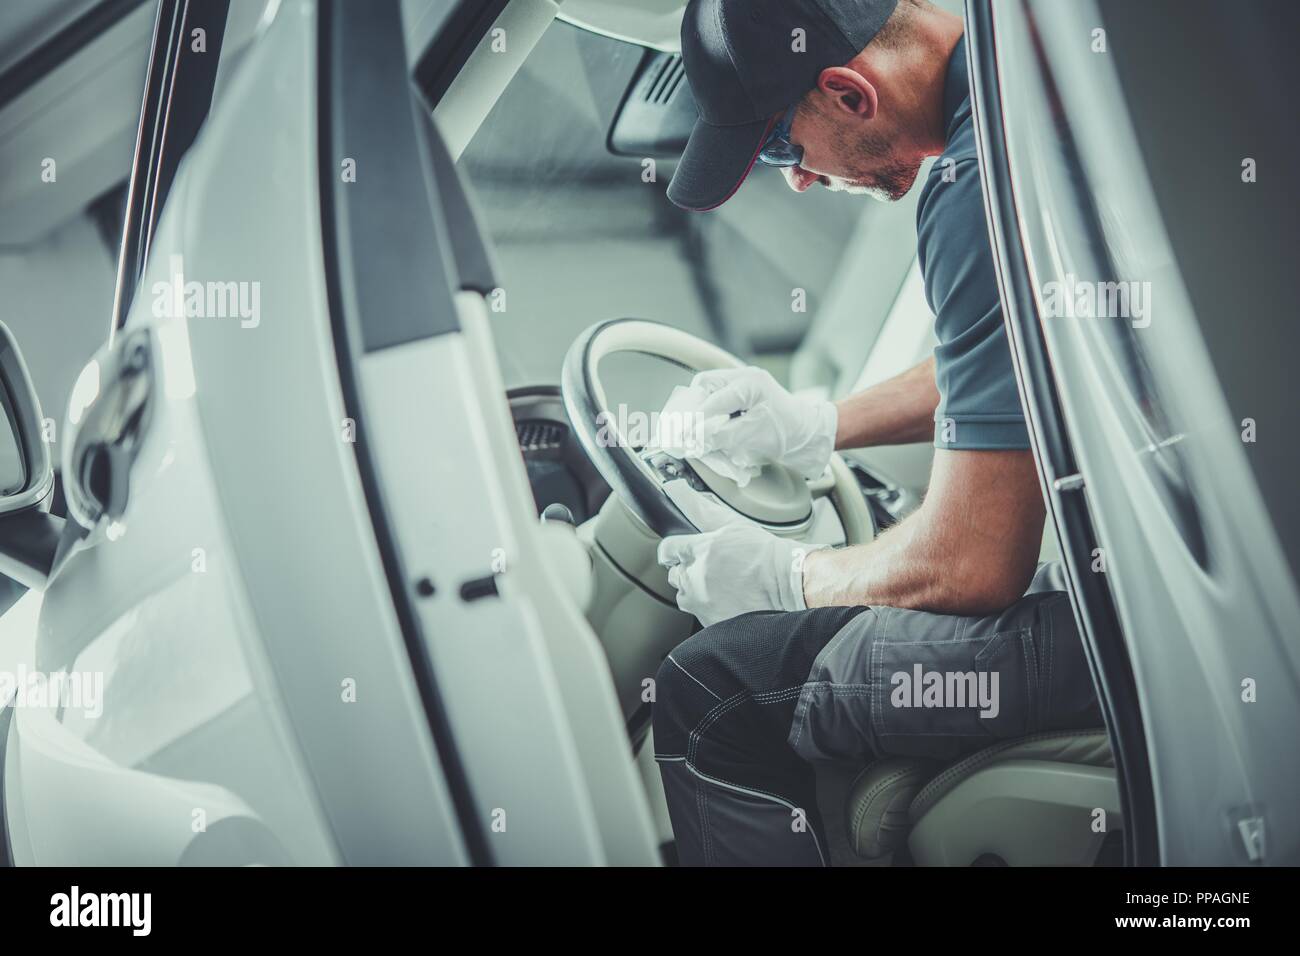 Car Detailing Cleaner. Caucasian Automotive Dealer Worker in His 30s Preparing Vehicle For Sale. Detailed Vehicle Interior Cleaning. Stock Photo